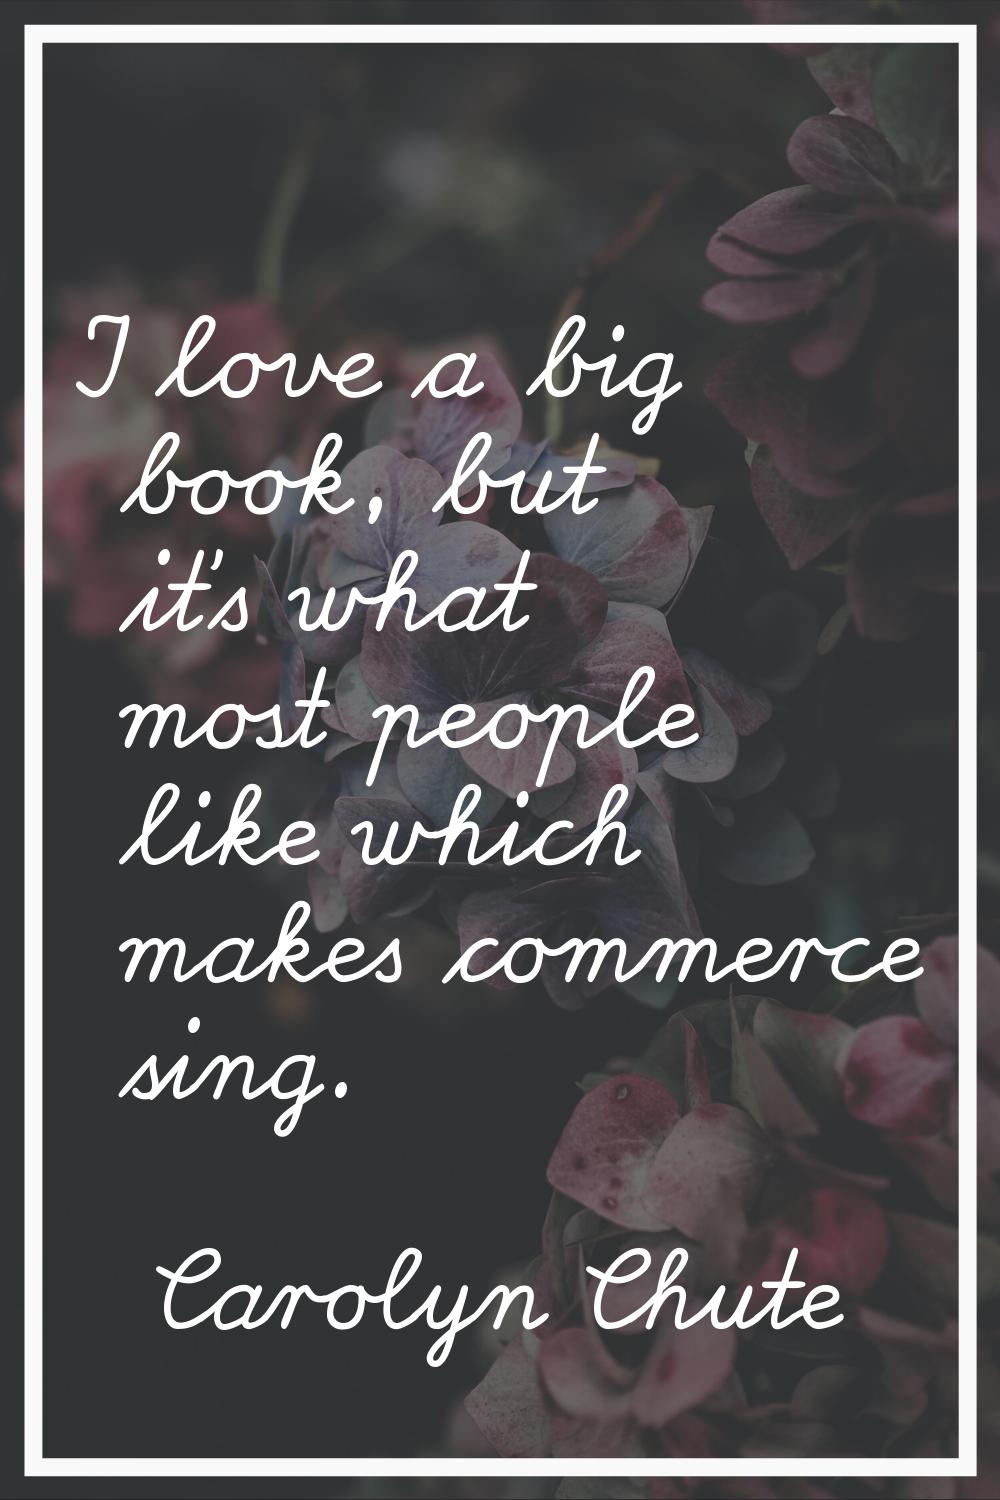 I love a big book, but it's what most people like which makes commerce sing.